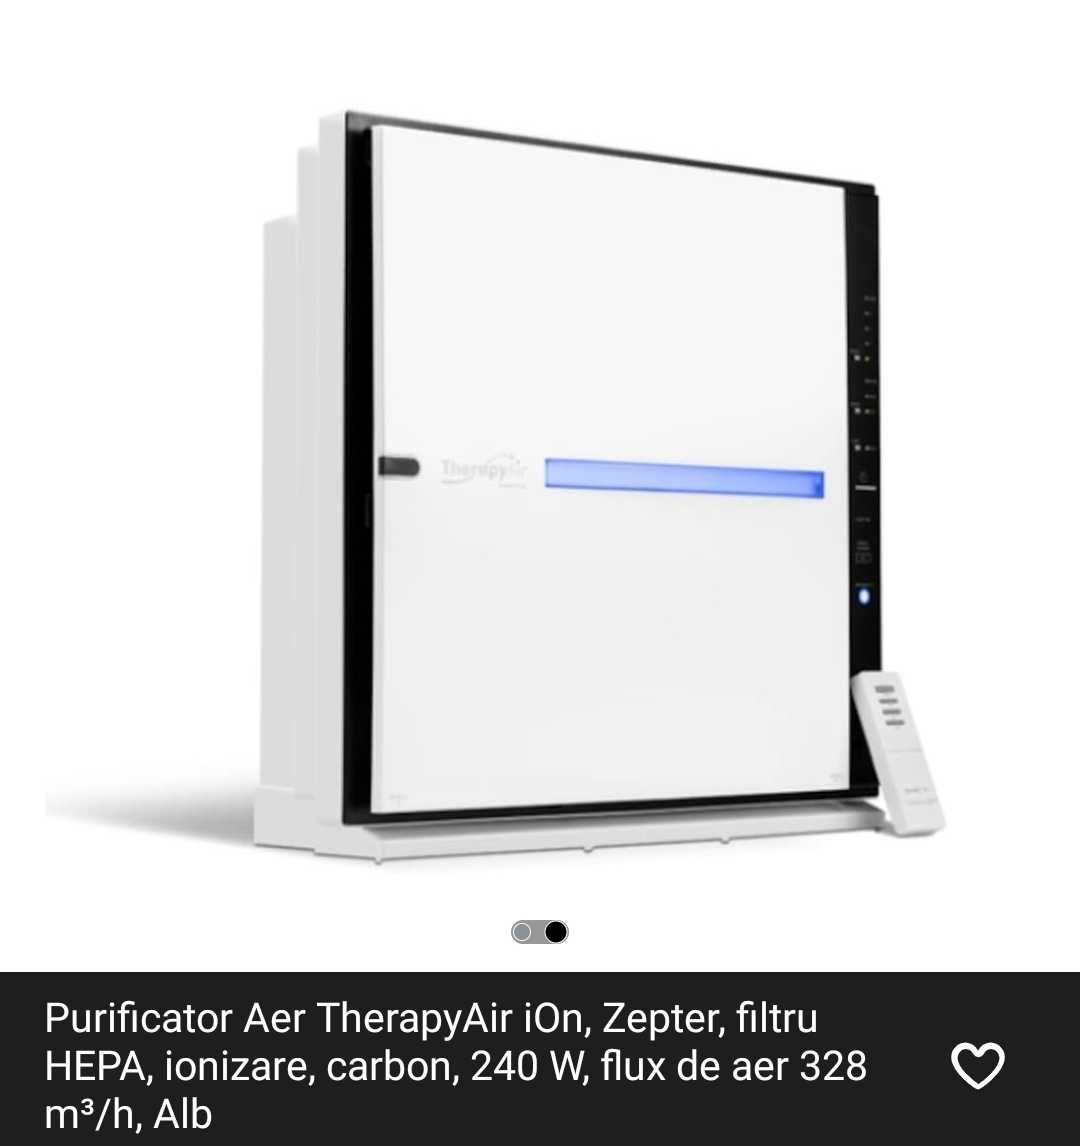 Therapy air iOn zepter